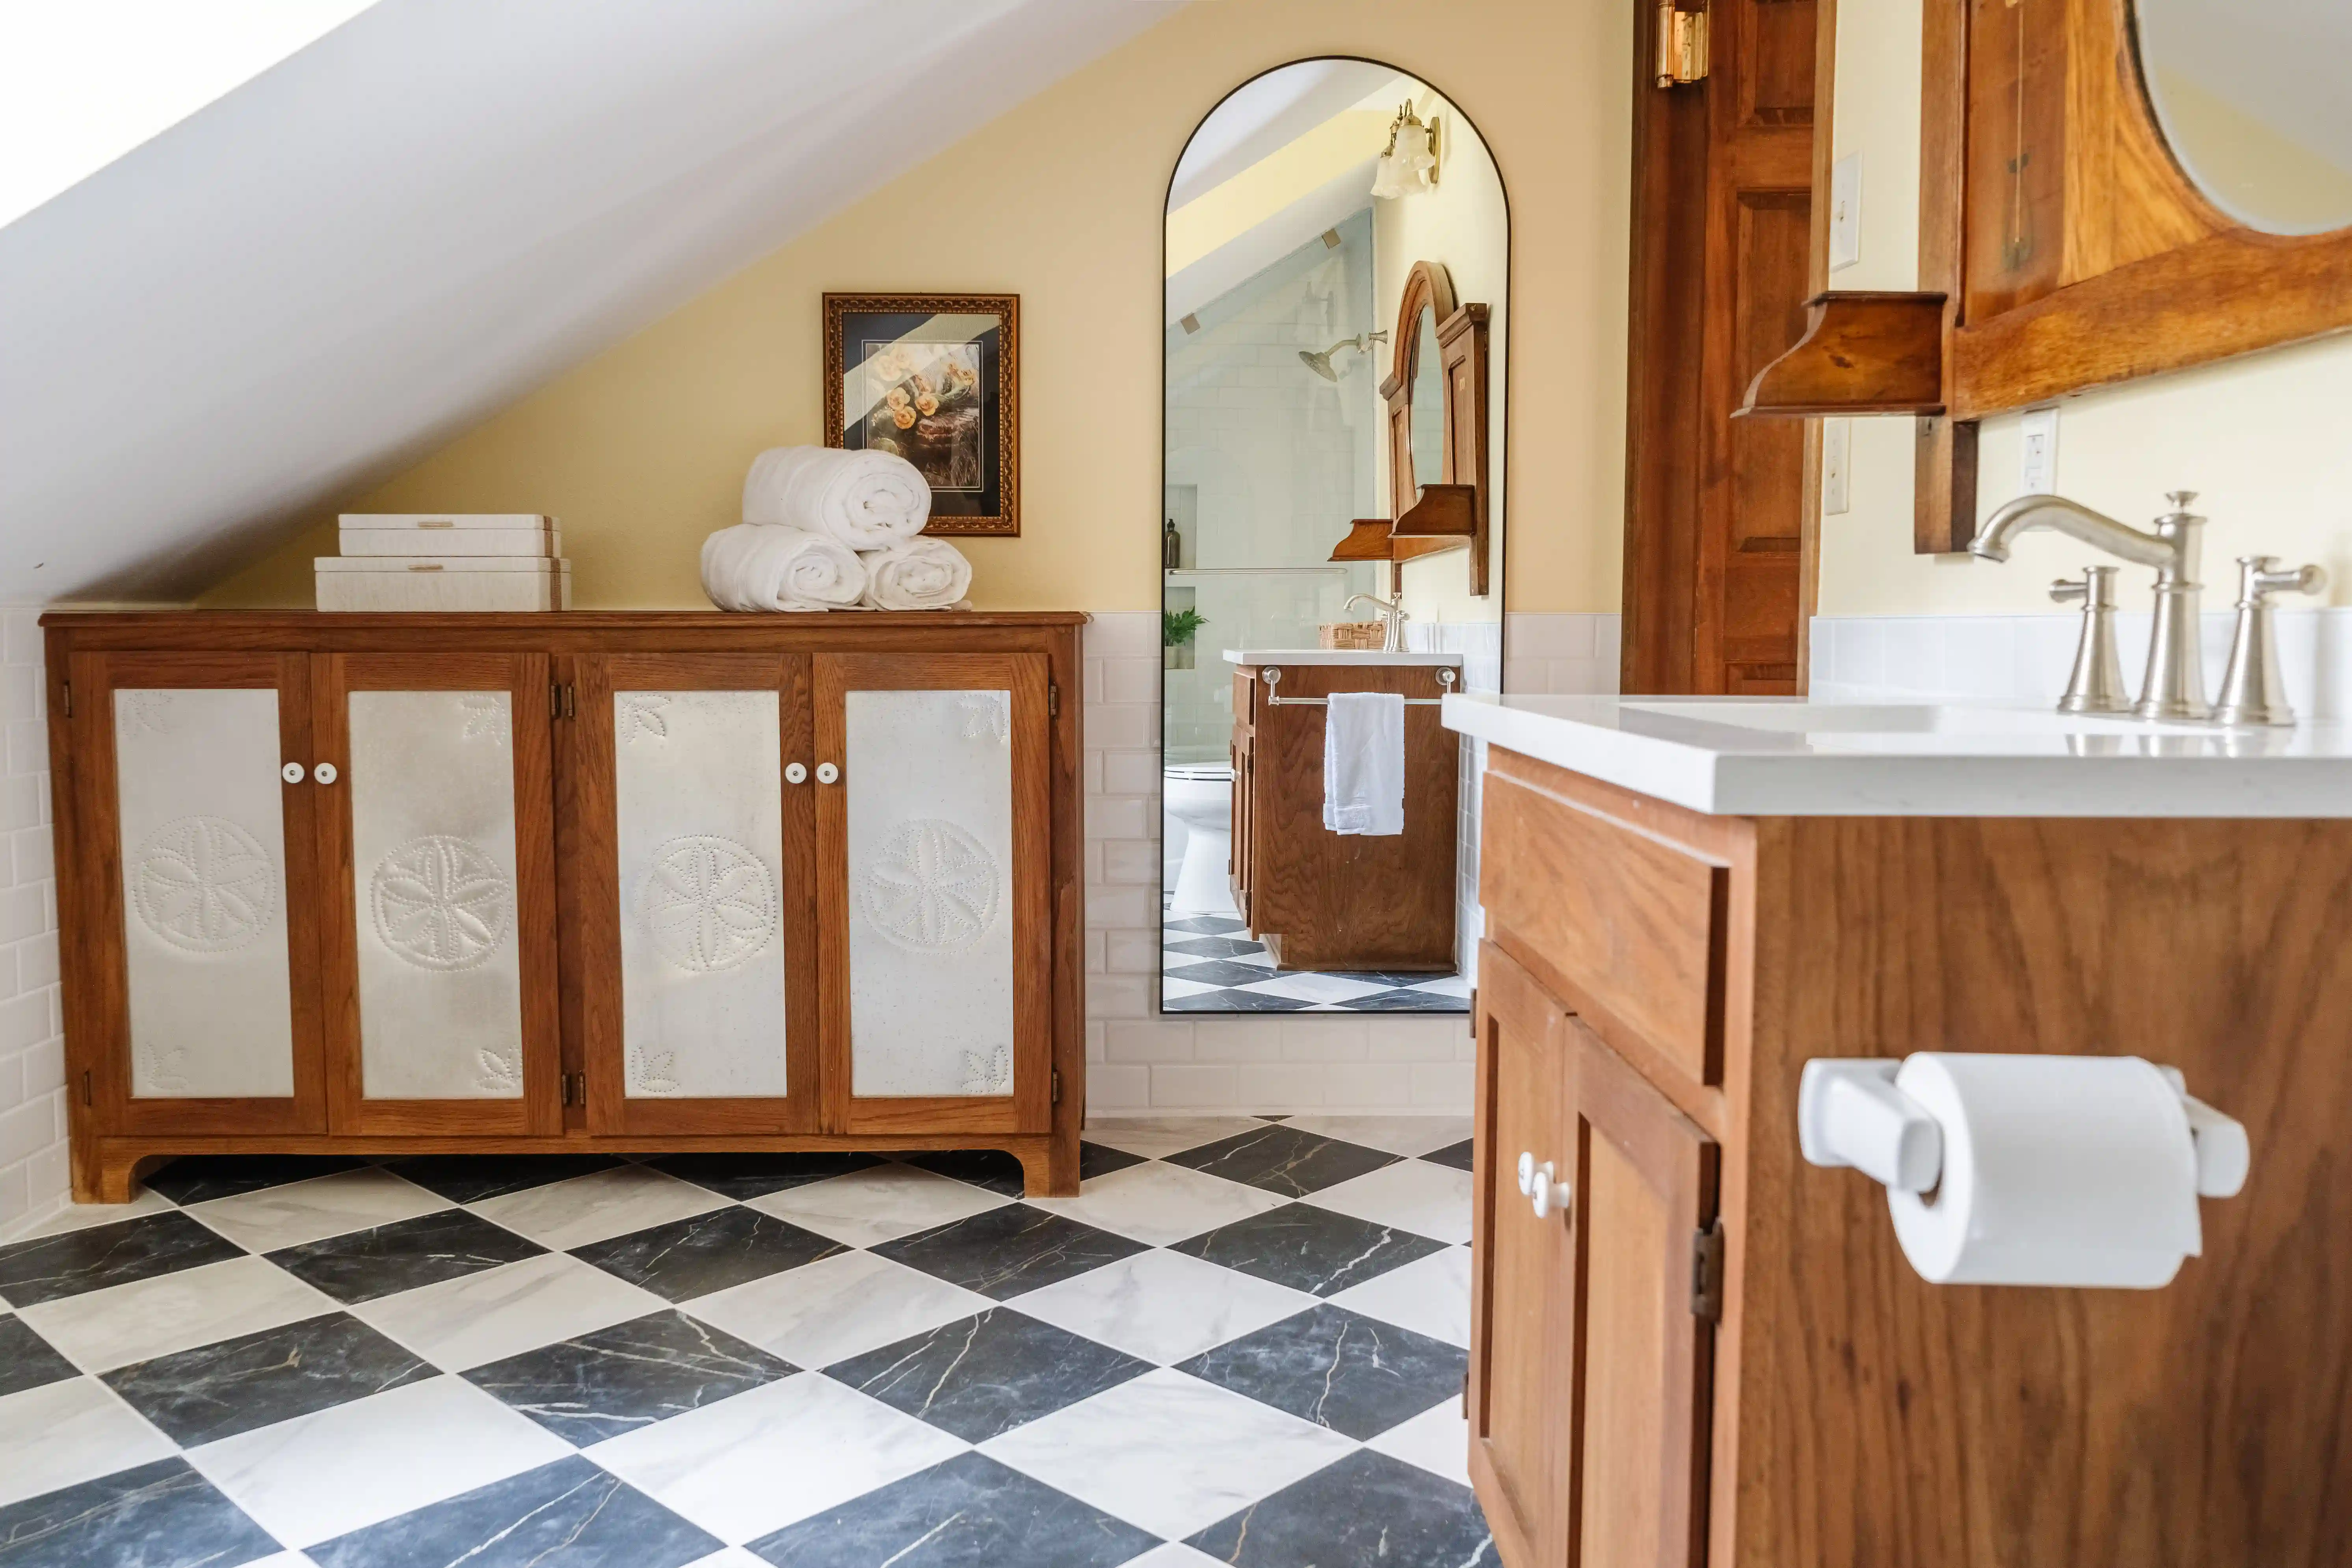 A bathroom with marble black and white checkered floors, a tan back wall, and a white slanted ceiling. There are two two door natural wood cabinets with white panels that have sand dollars engraved into them and silver handles to each door. Placed on the top of them is a stack of white books on the left and three towels stacked into a triangle on the right of the top of the cabinets. Behind the three towels on the wall is a wooden framed picture on the wall that is undecernable as to what it is in the photo. To the right of the cabinet and picture is a full length bosy mirror with an arched top and square bottom corners. You can see a wooden door that closely matches the two cabinets on the left of the wall. Coming closer to the audience looking at the photo on the right wall of the room is a wooden framed mirrow over a bathroom vanity with a white counter top, brushed satin faucet with two handles and wooden cabinets with two brushed satin handles on each cabinet door. 